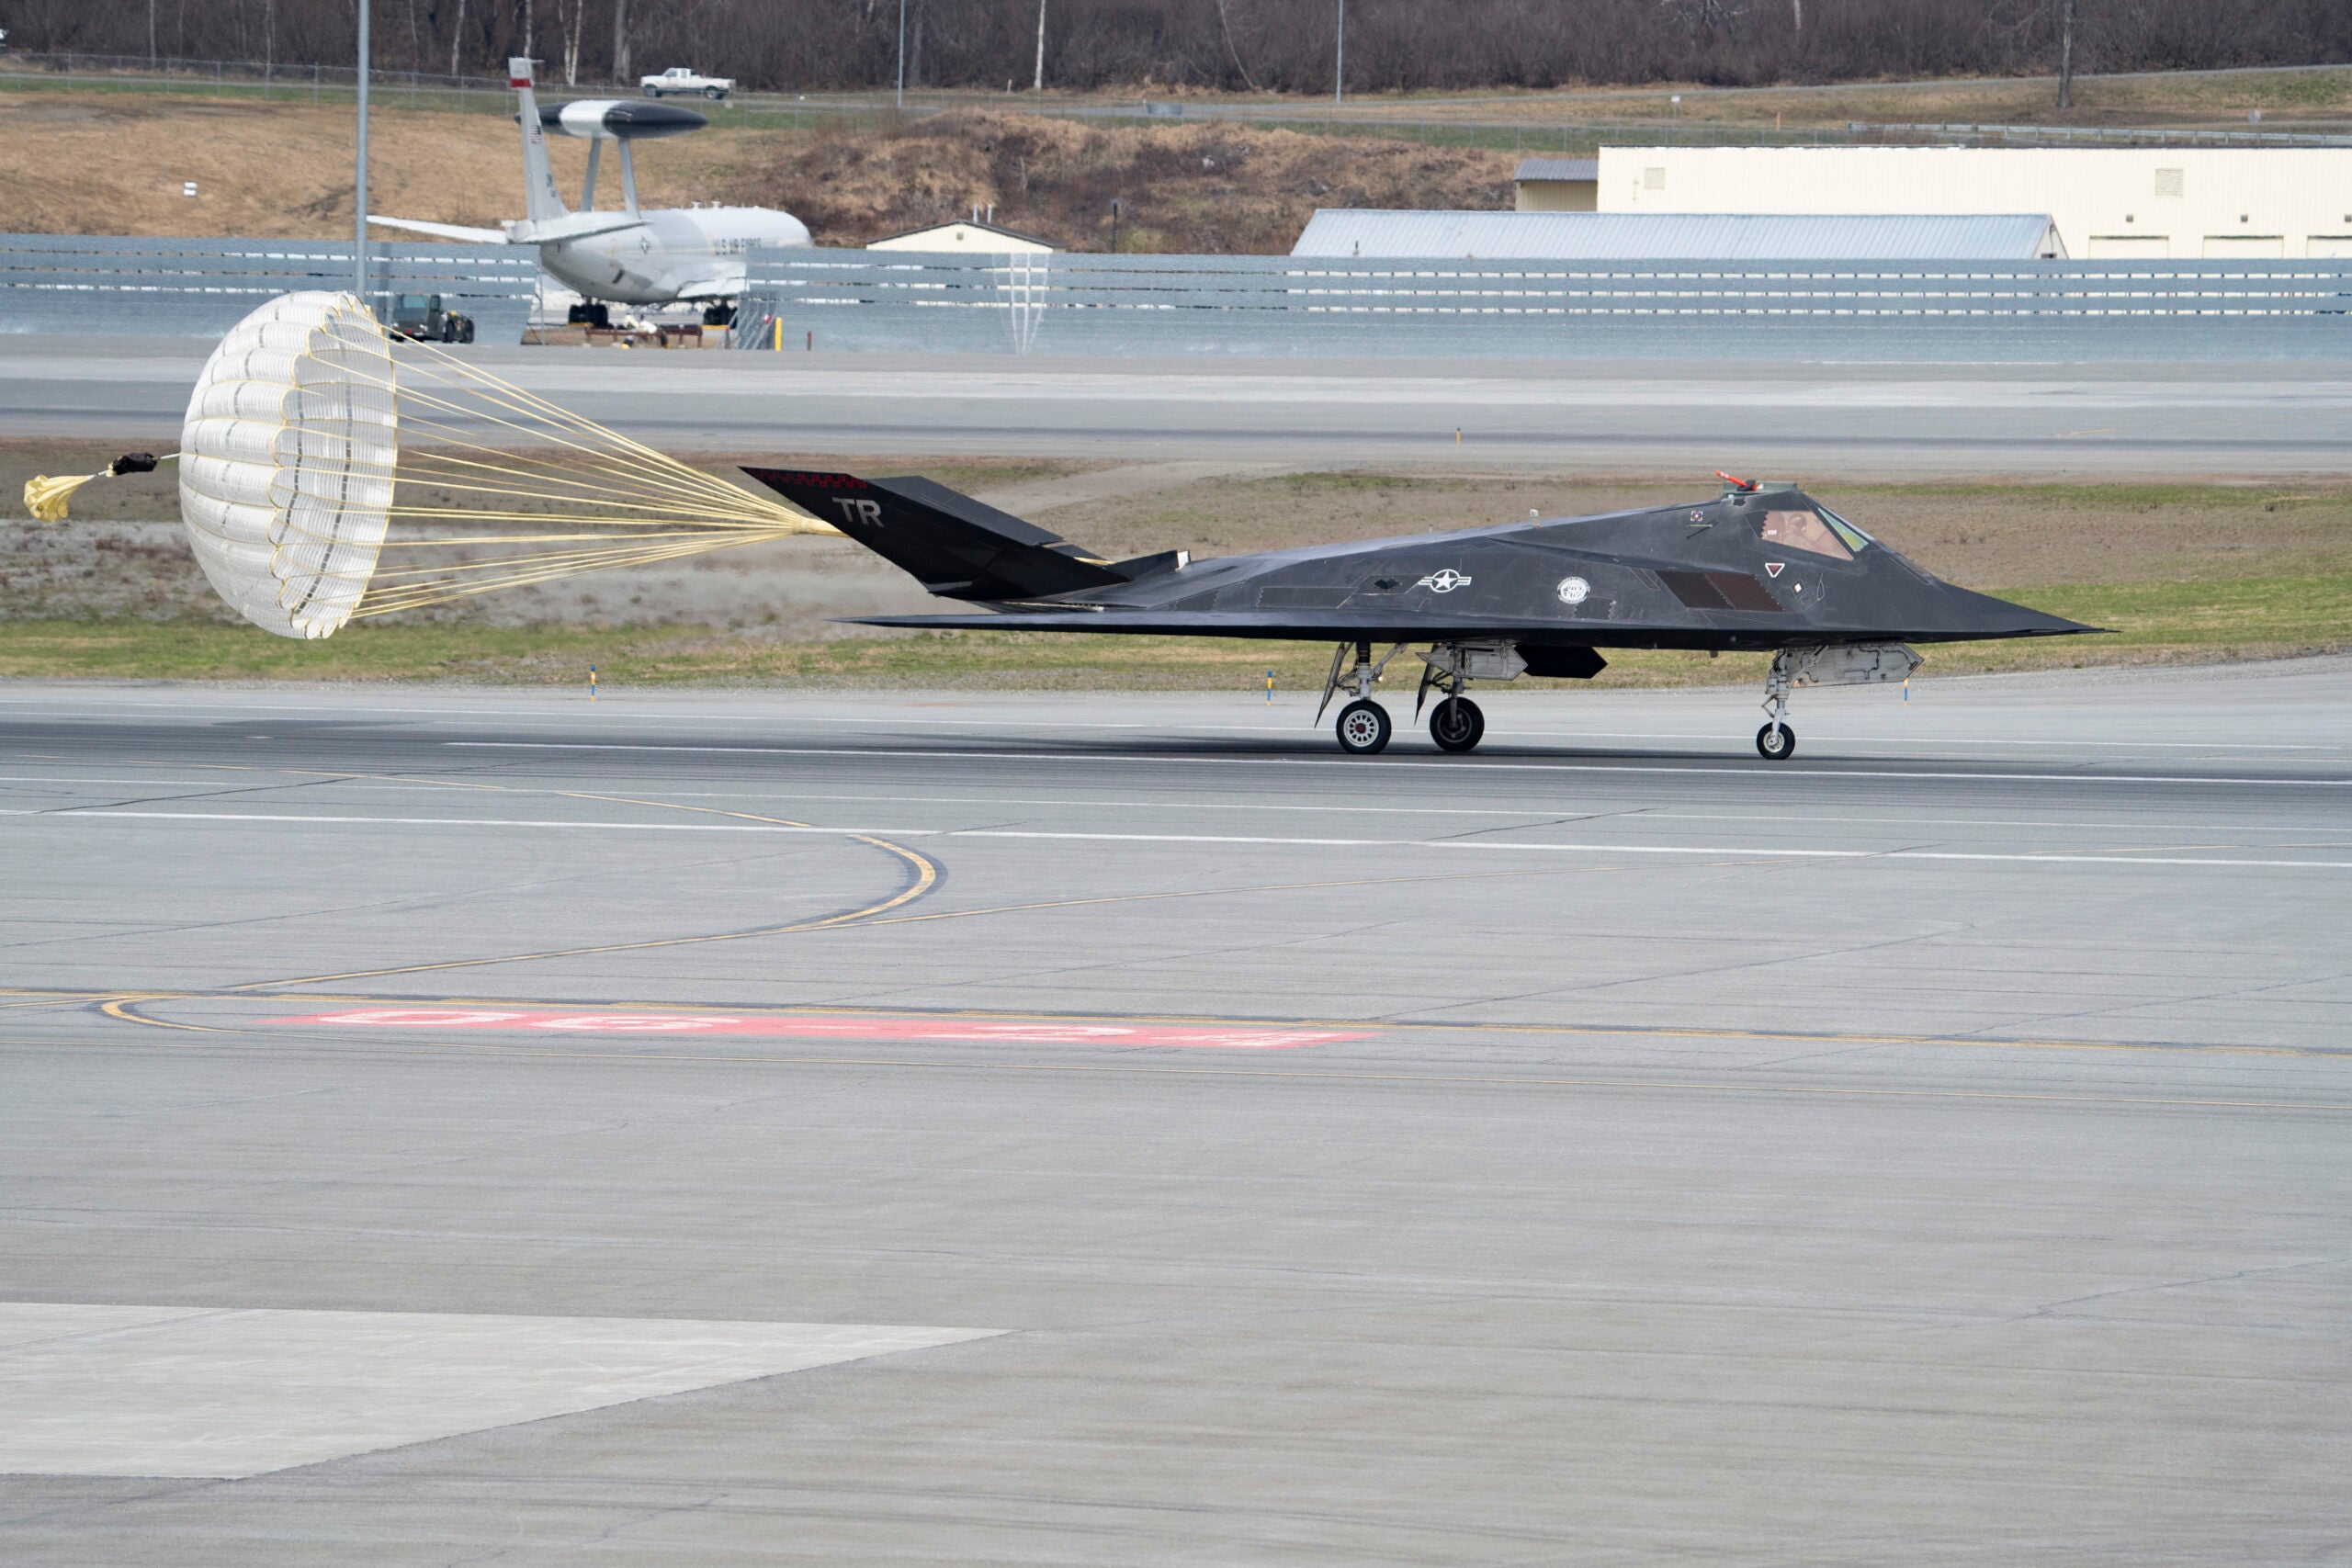 A U.S. Air Force F-117 Nighthawk lands during Northern Edge 23-1 at Joint Base Elmendorf-Richardson, Alaska, May 10, 2023. NE 23-1 provides an opportunity for joint, multinational and multi-domain operations designed to implement high-end, realistic war fighter training, develop and improve joint interoperability, and enhance the combat readiness of participating forces. (U.S. Air Force photo by Airman 1st Class Shelimar Rivera Rosado)